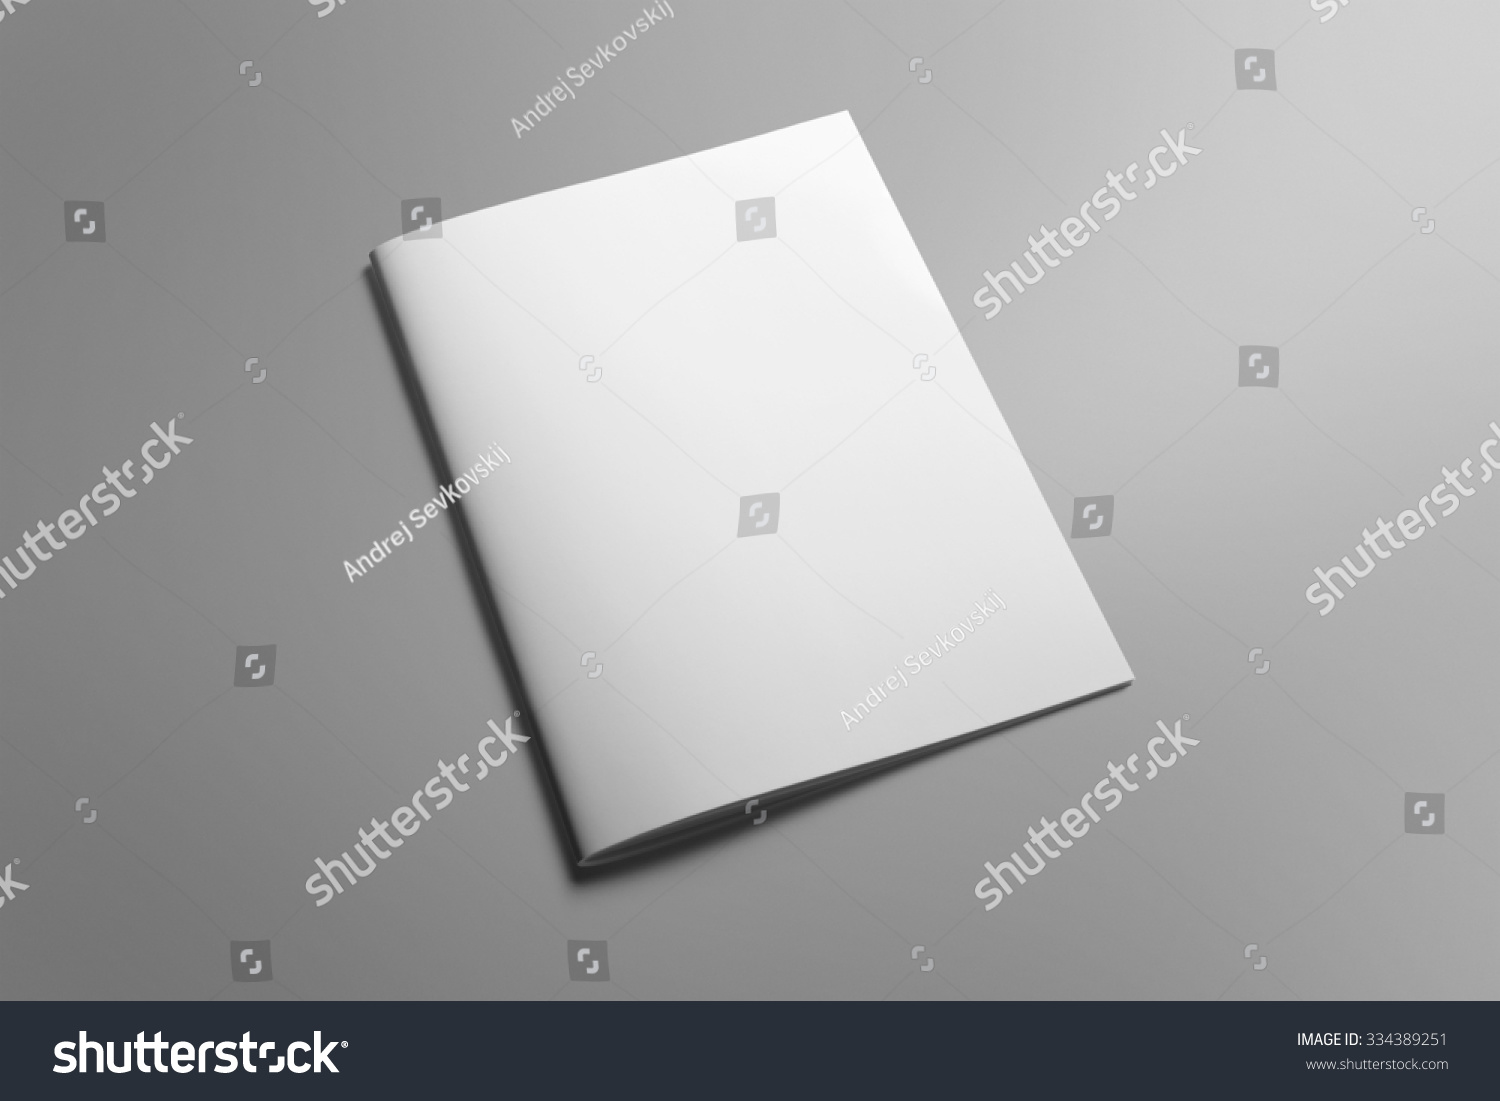 Blank portrait A4, US-Letter, brochure magazine isolated on gray, with clipping path, changeable background #334389251